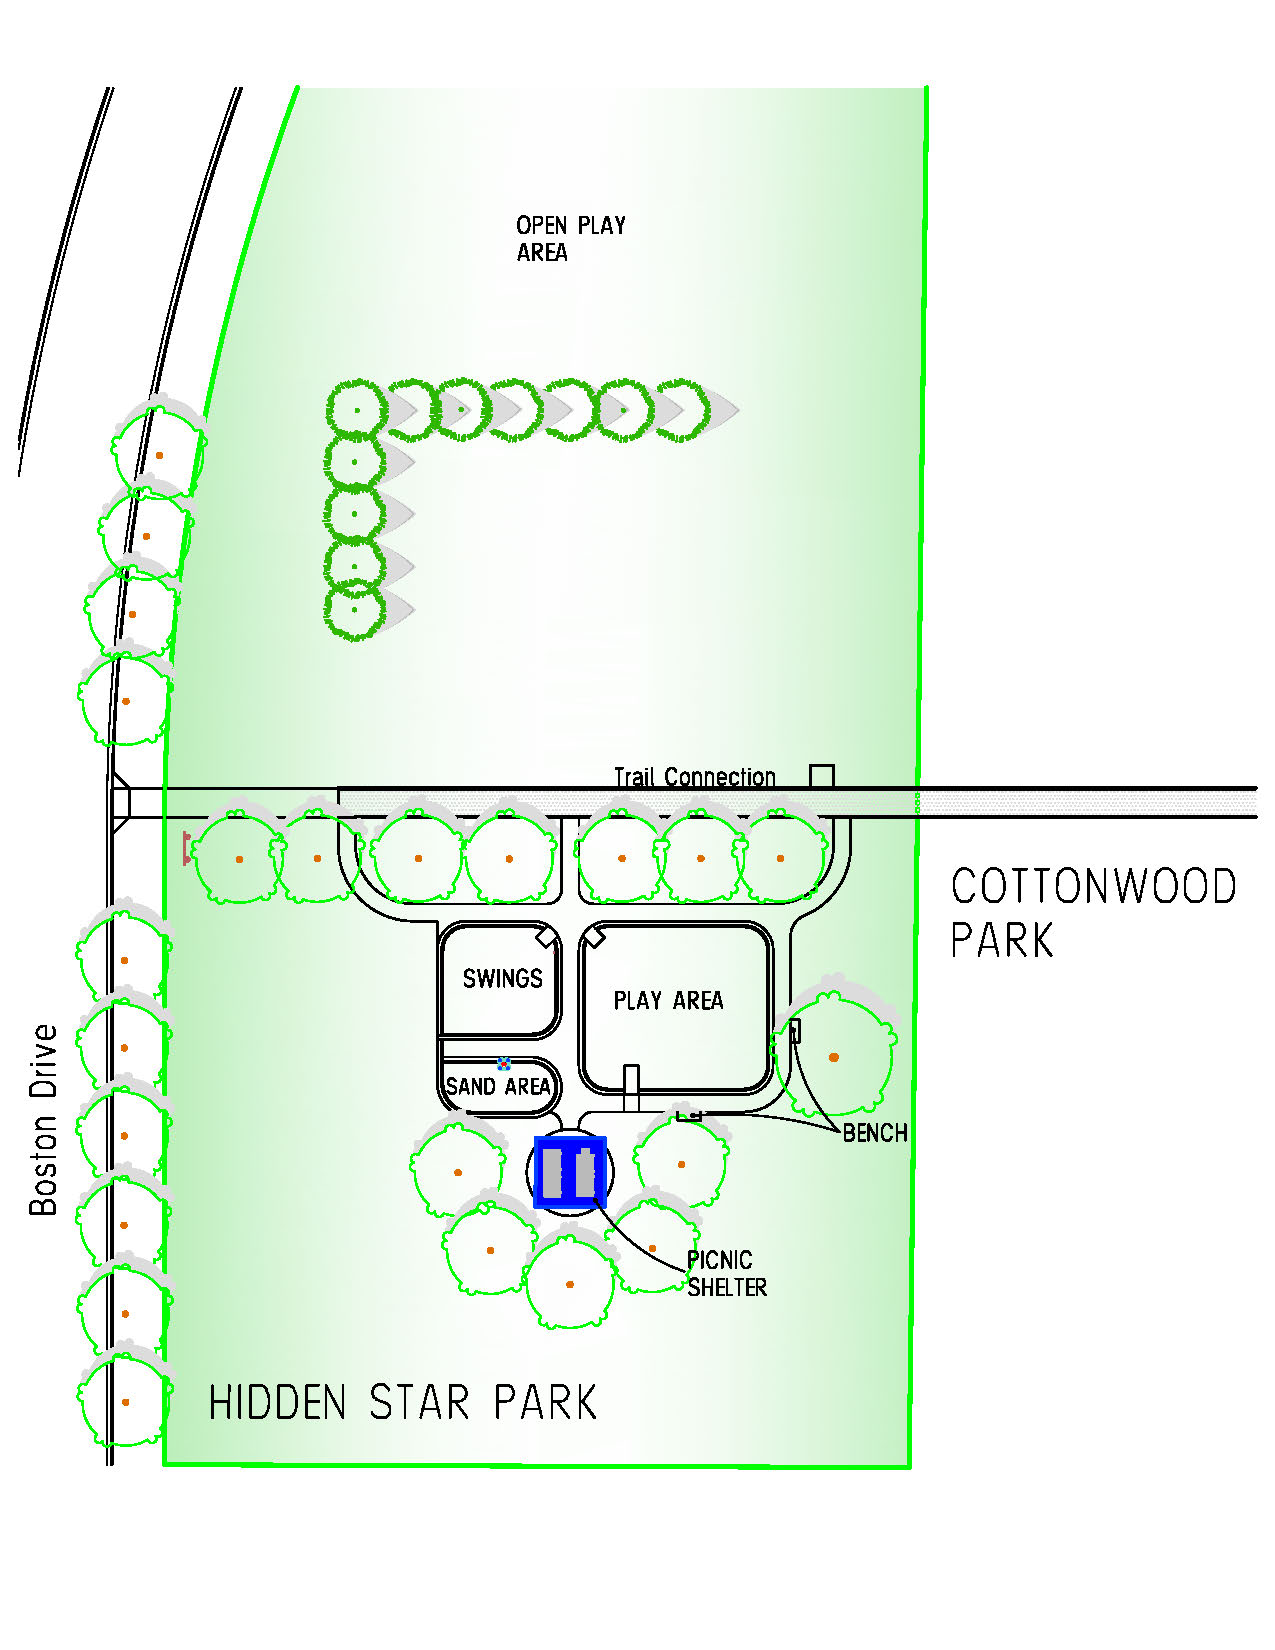 Map of Hidden Star park highlighting features including play area, swings, sand area, picnic shelter, open play area and trail connection.